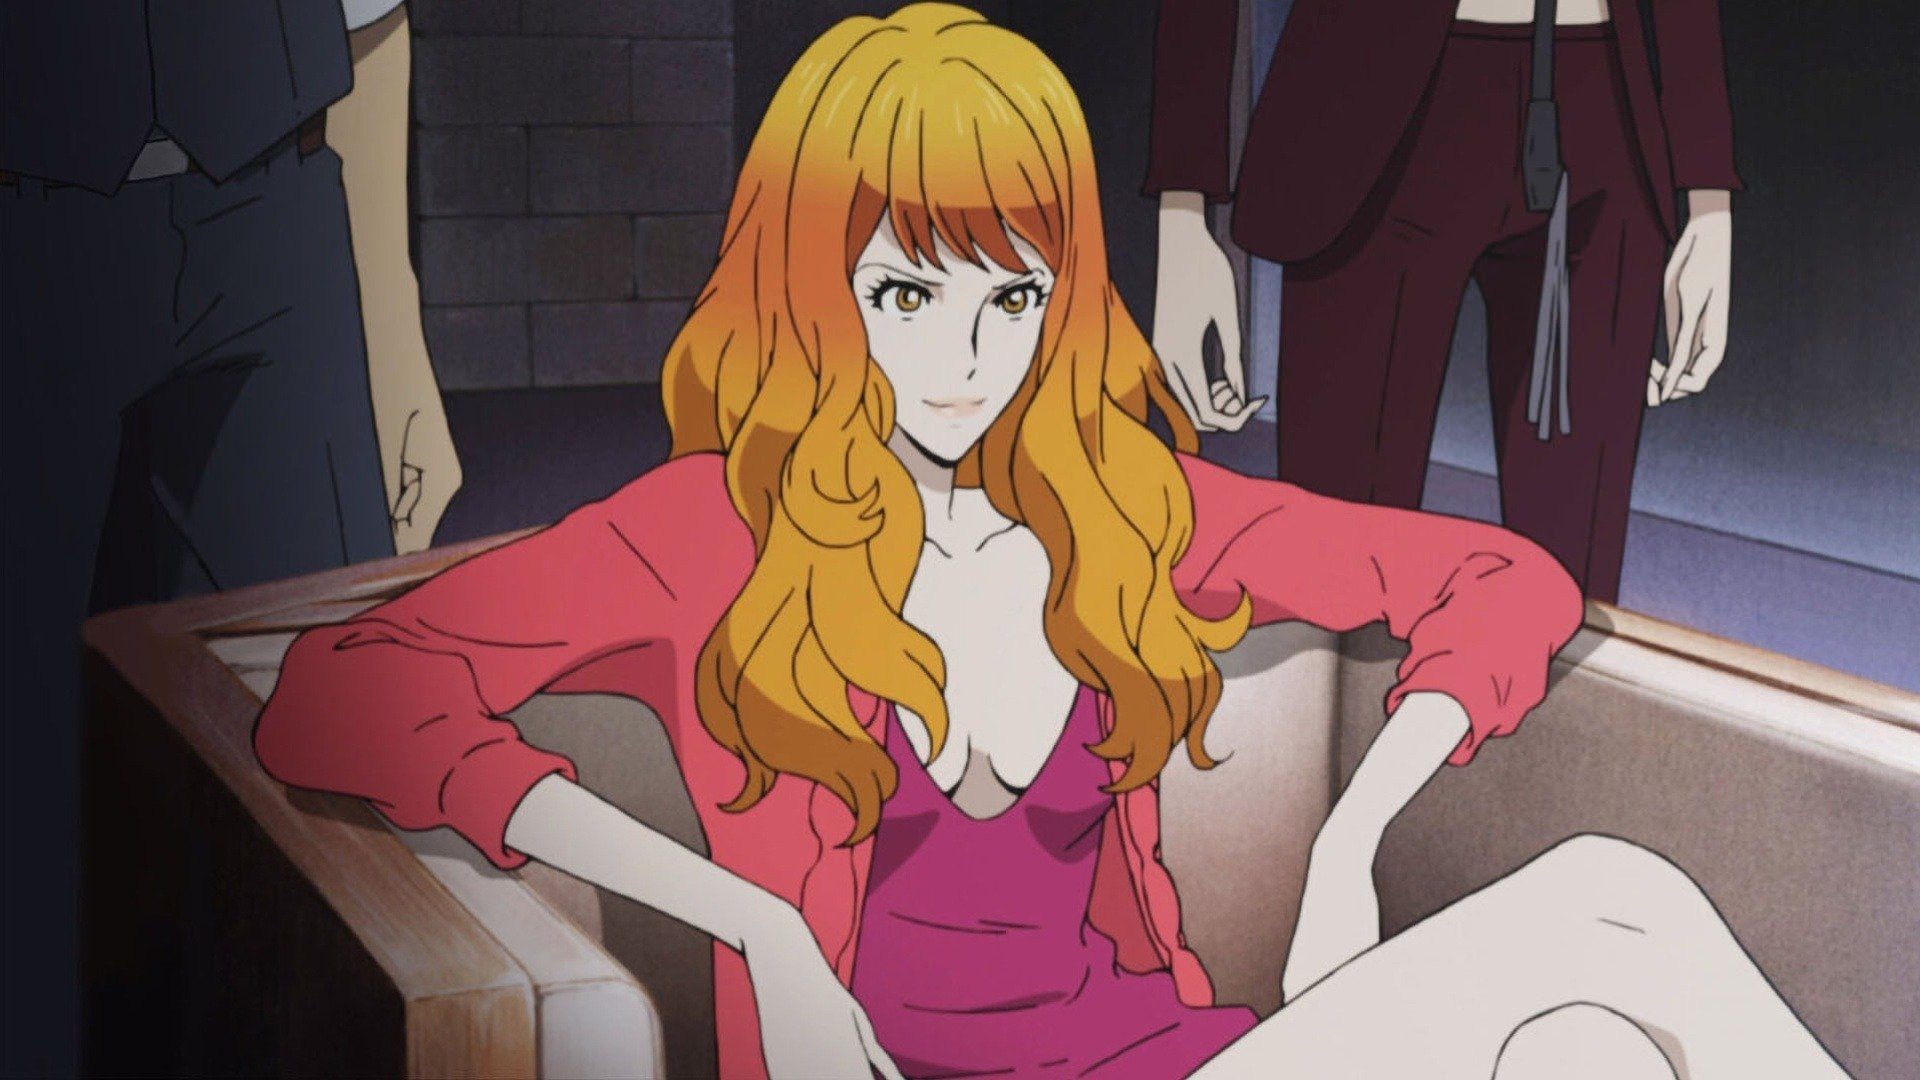 Lupin the Third: Prison of the Past Backdrop